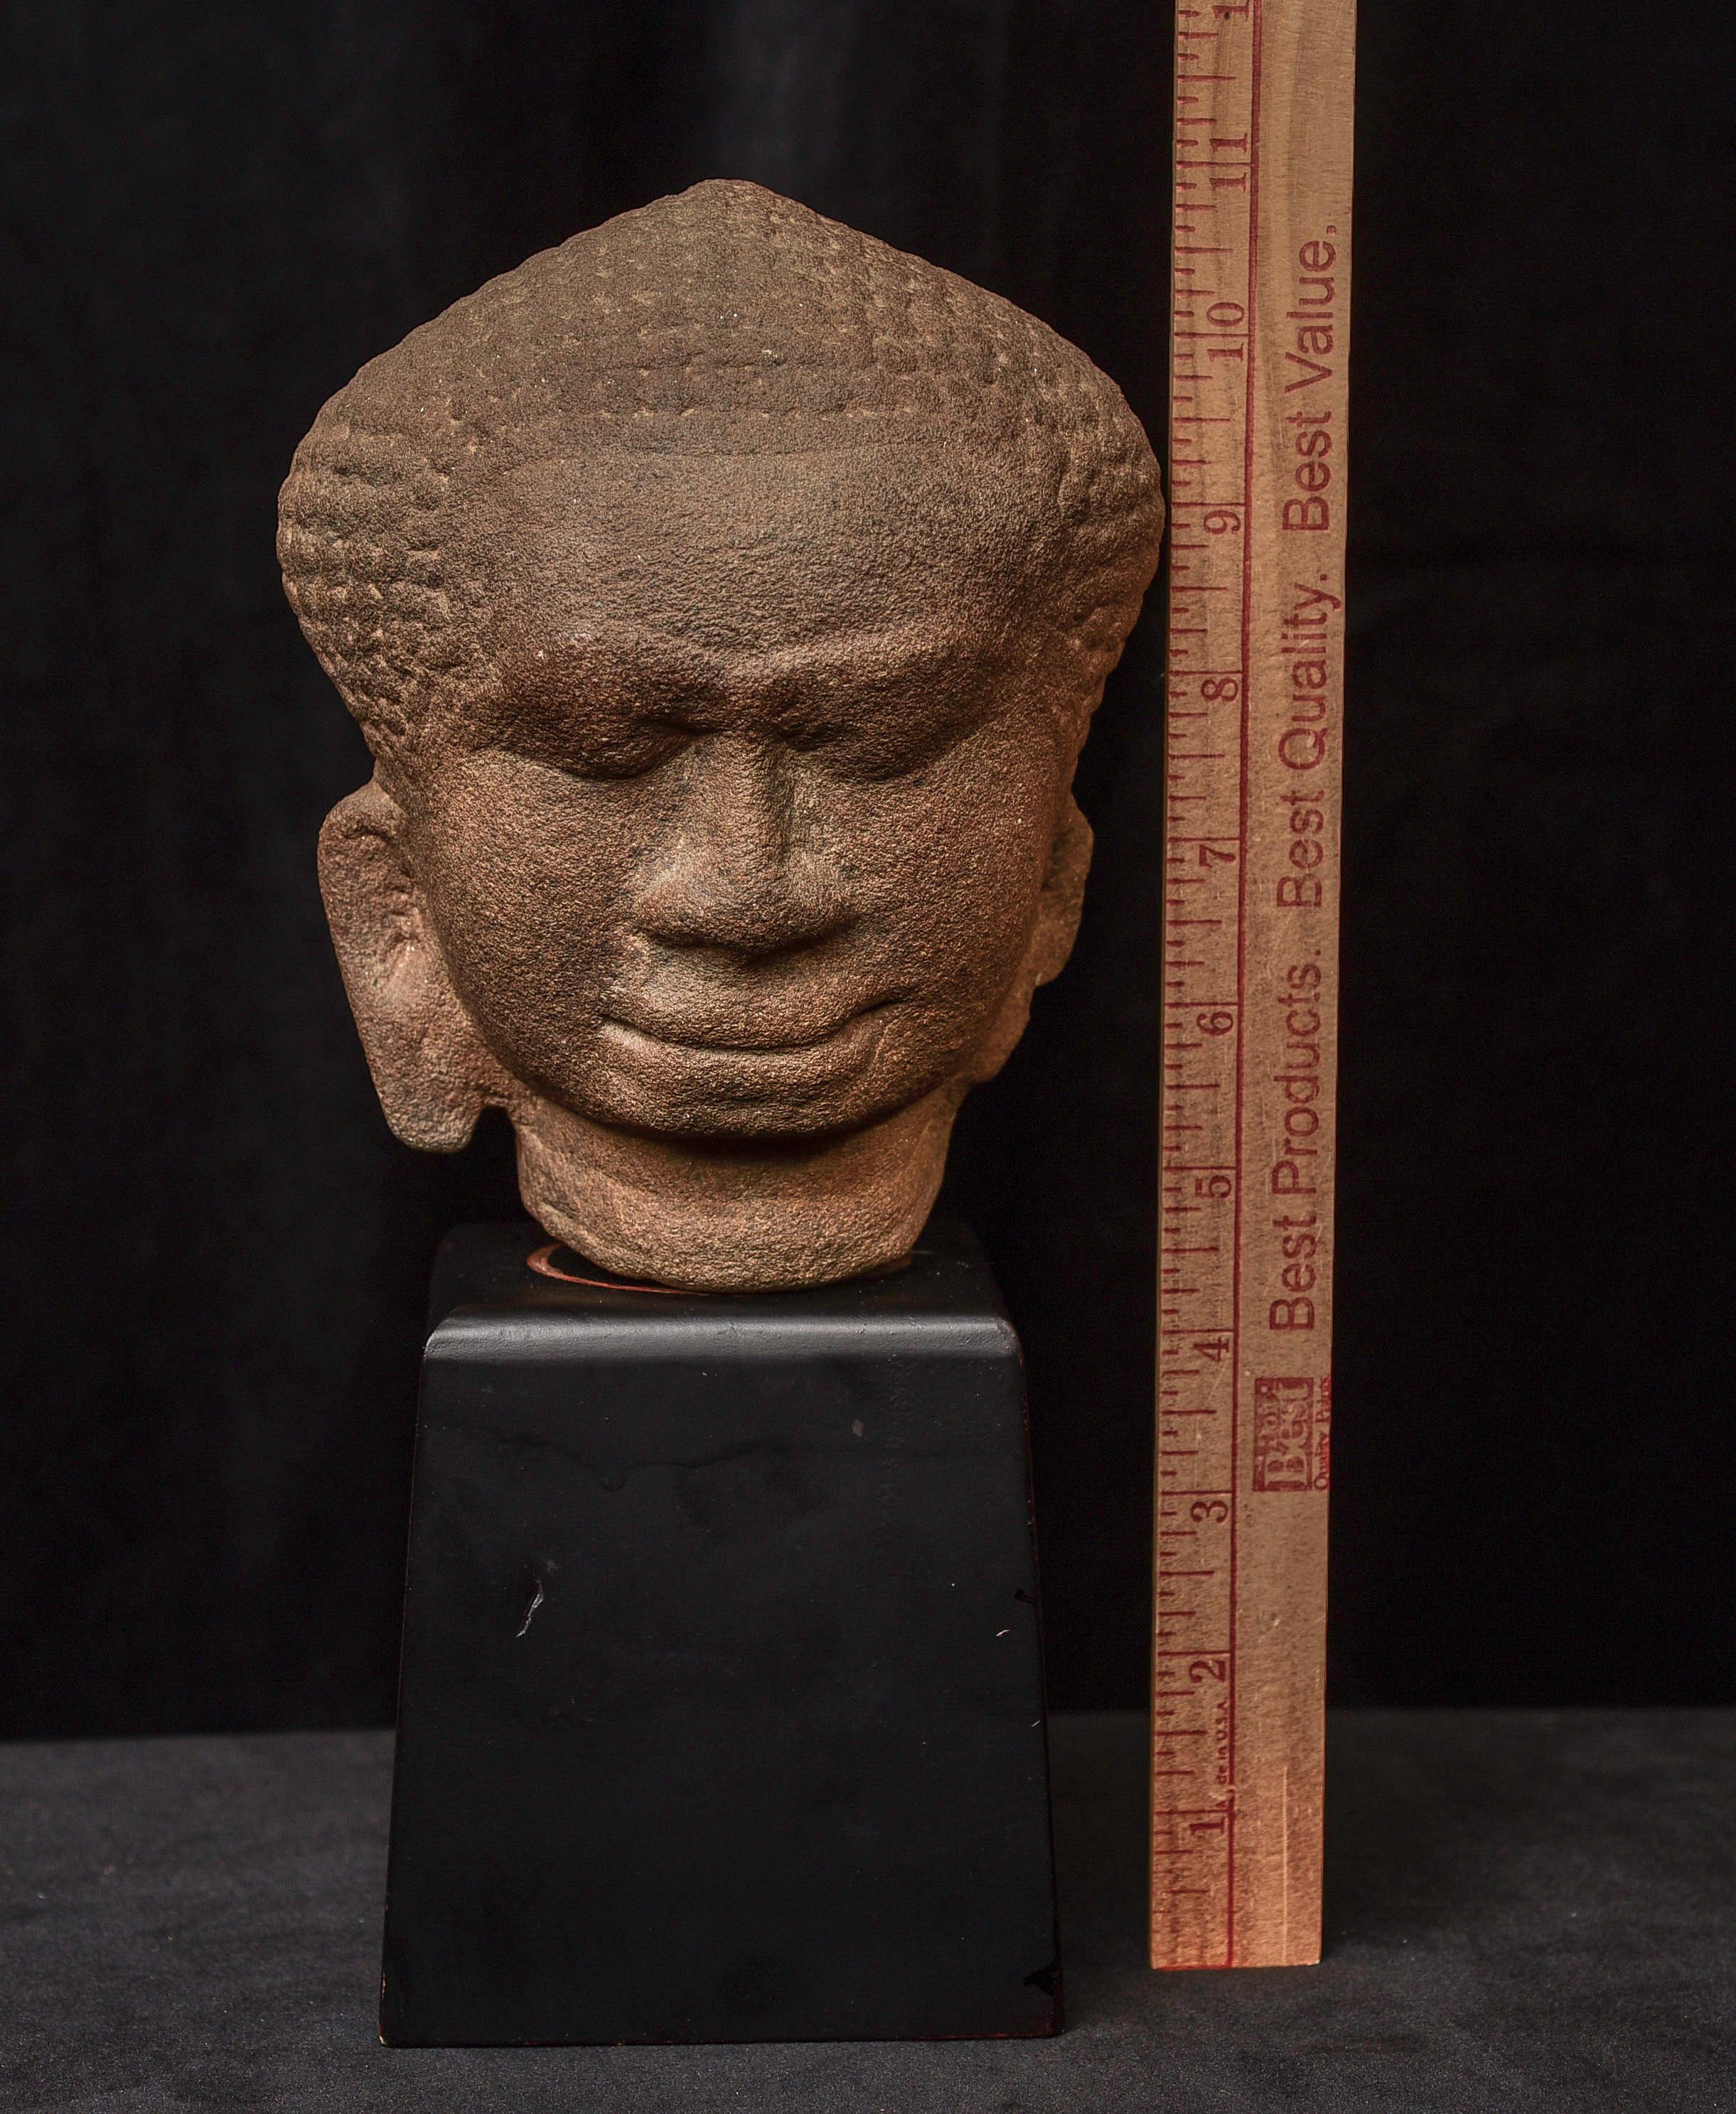 13/14thC Thai Stone Buddha Head- Sweet! For many centuries, up until the 13th or 14th centuries, in Northern Thailand, south of Chiang Mai, (under Cambodian domination during the Khmer Empire , existed the Haripunchai Kingdom. It blends Khmer and